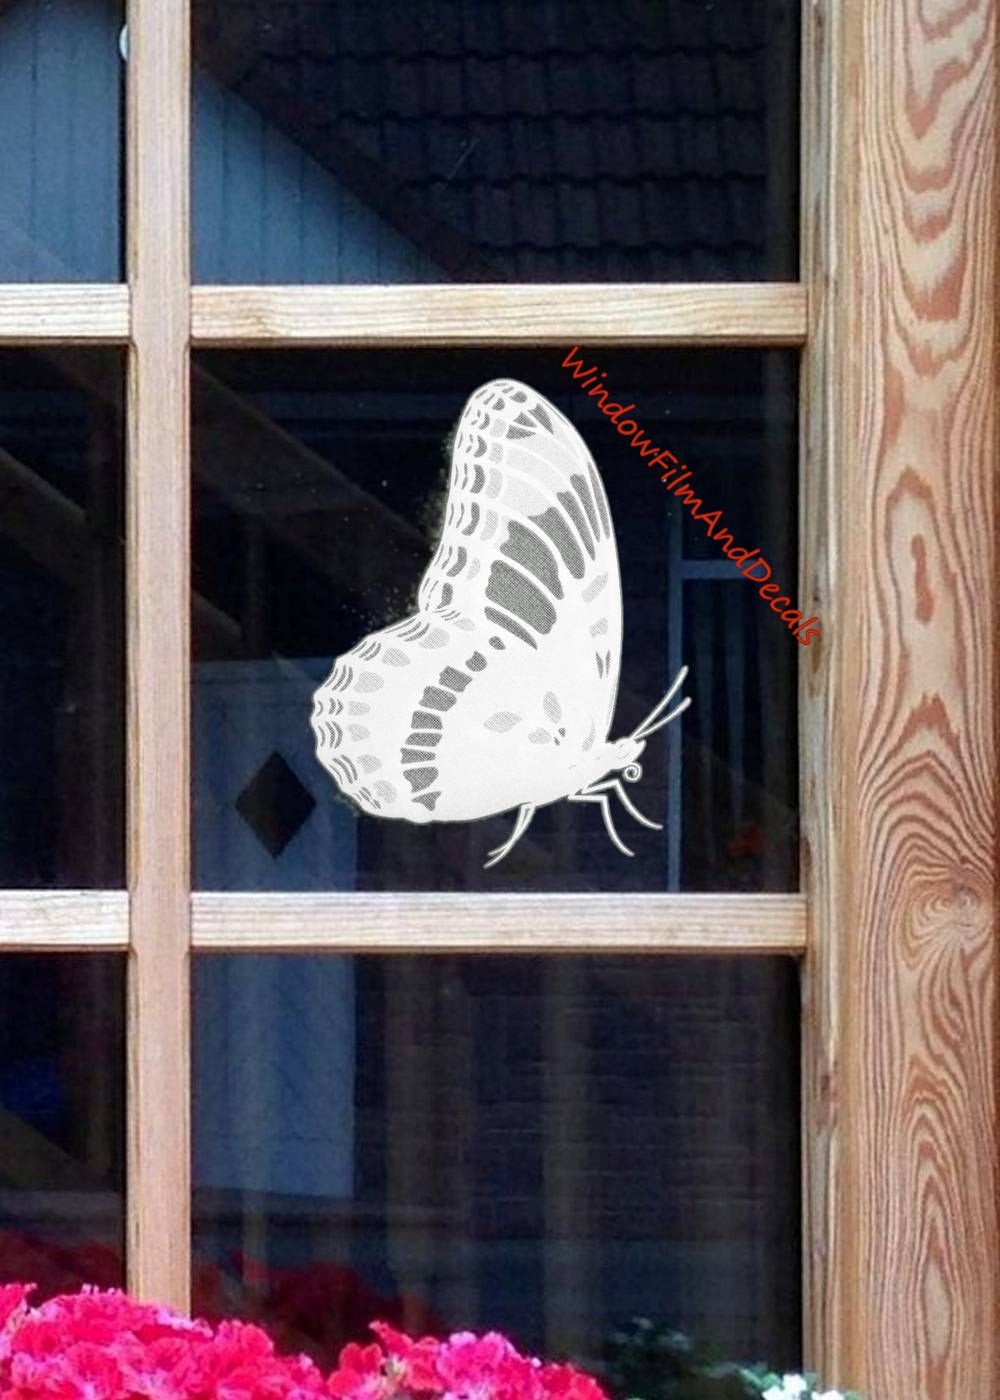 Butterfly (Rev) Oval Static Cling Window Decal 4" x 6" - Clear w/White Design